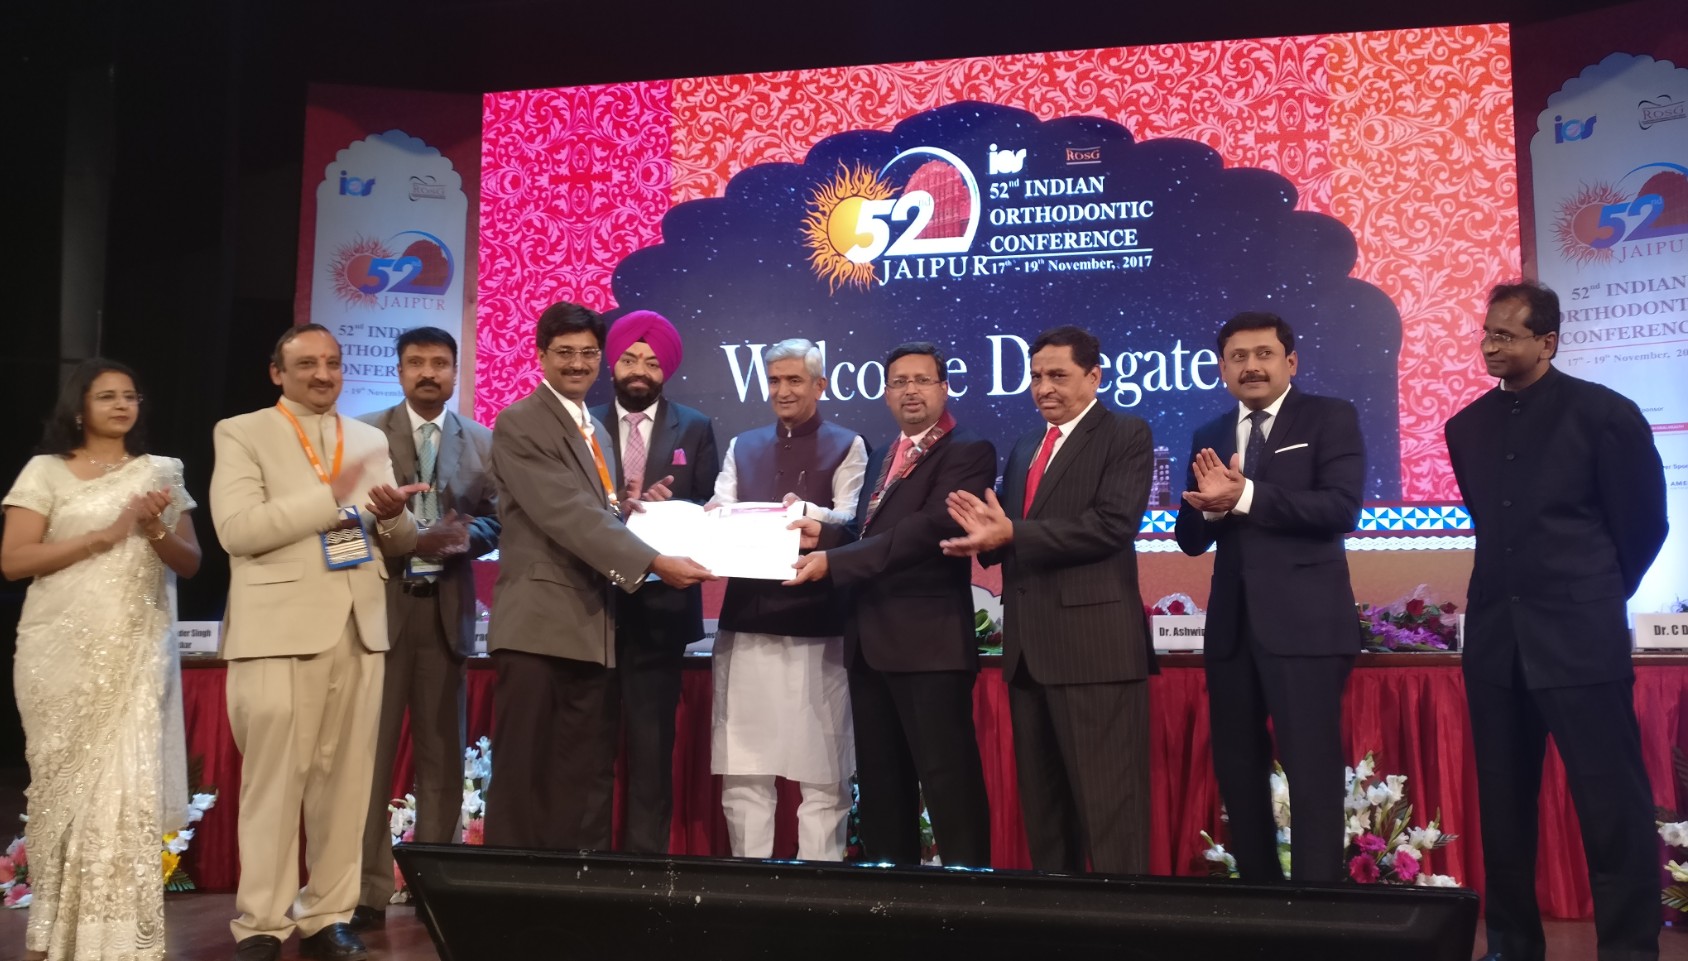 Dr. Gulve Nitin received first prize for Table Clinic presentation